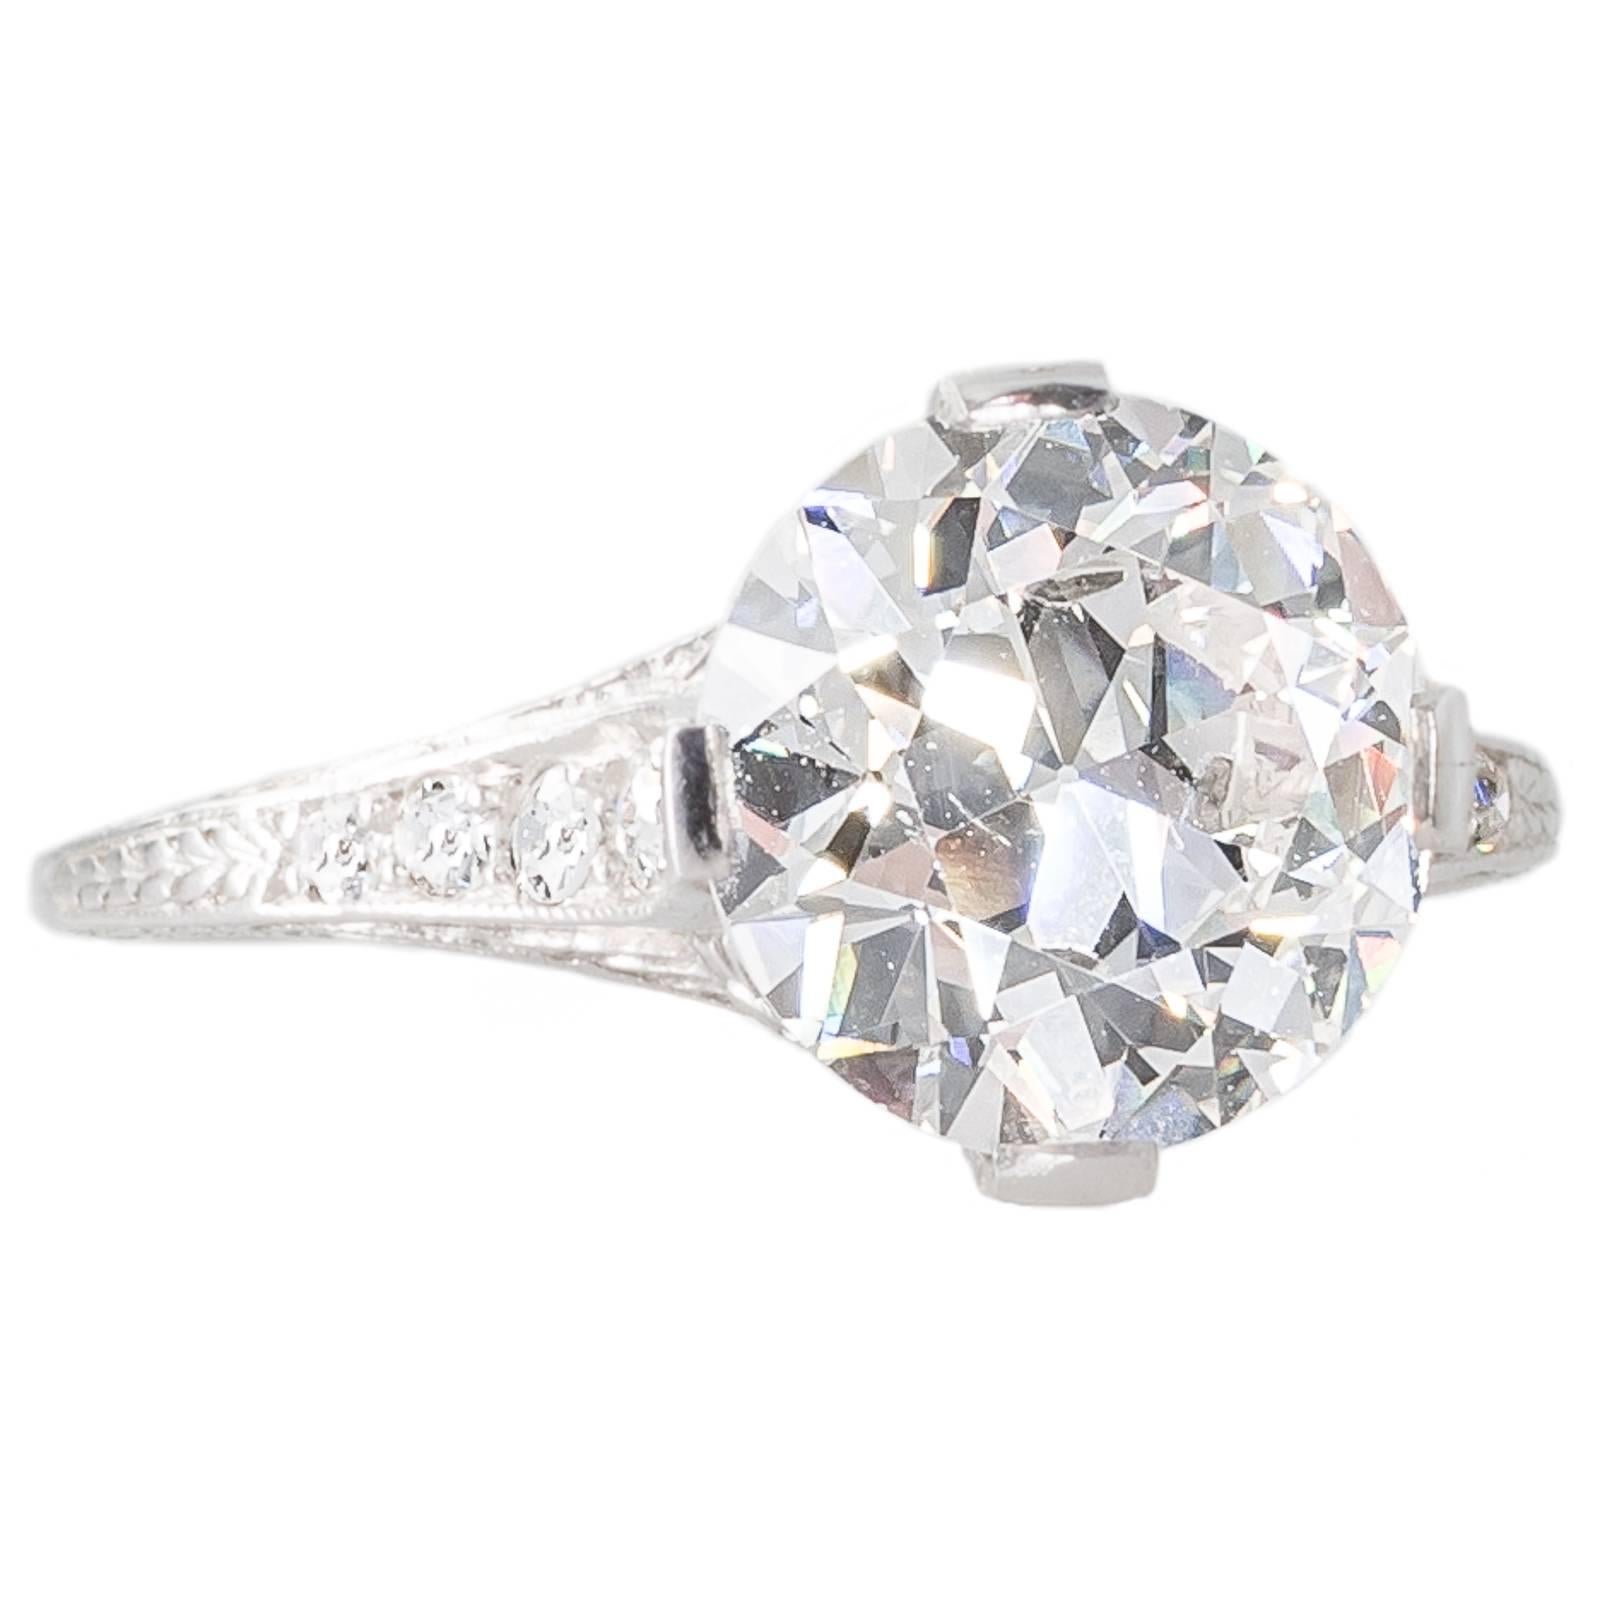 An antique platinum solitaire ring, featuring a 3.11ct transition cut diamond, graded as colour G, clarity SI1, accompanied by a GIA certificate, set in four engraved claws that follow down the finely pierced linear gallery which flares out at